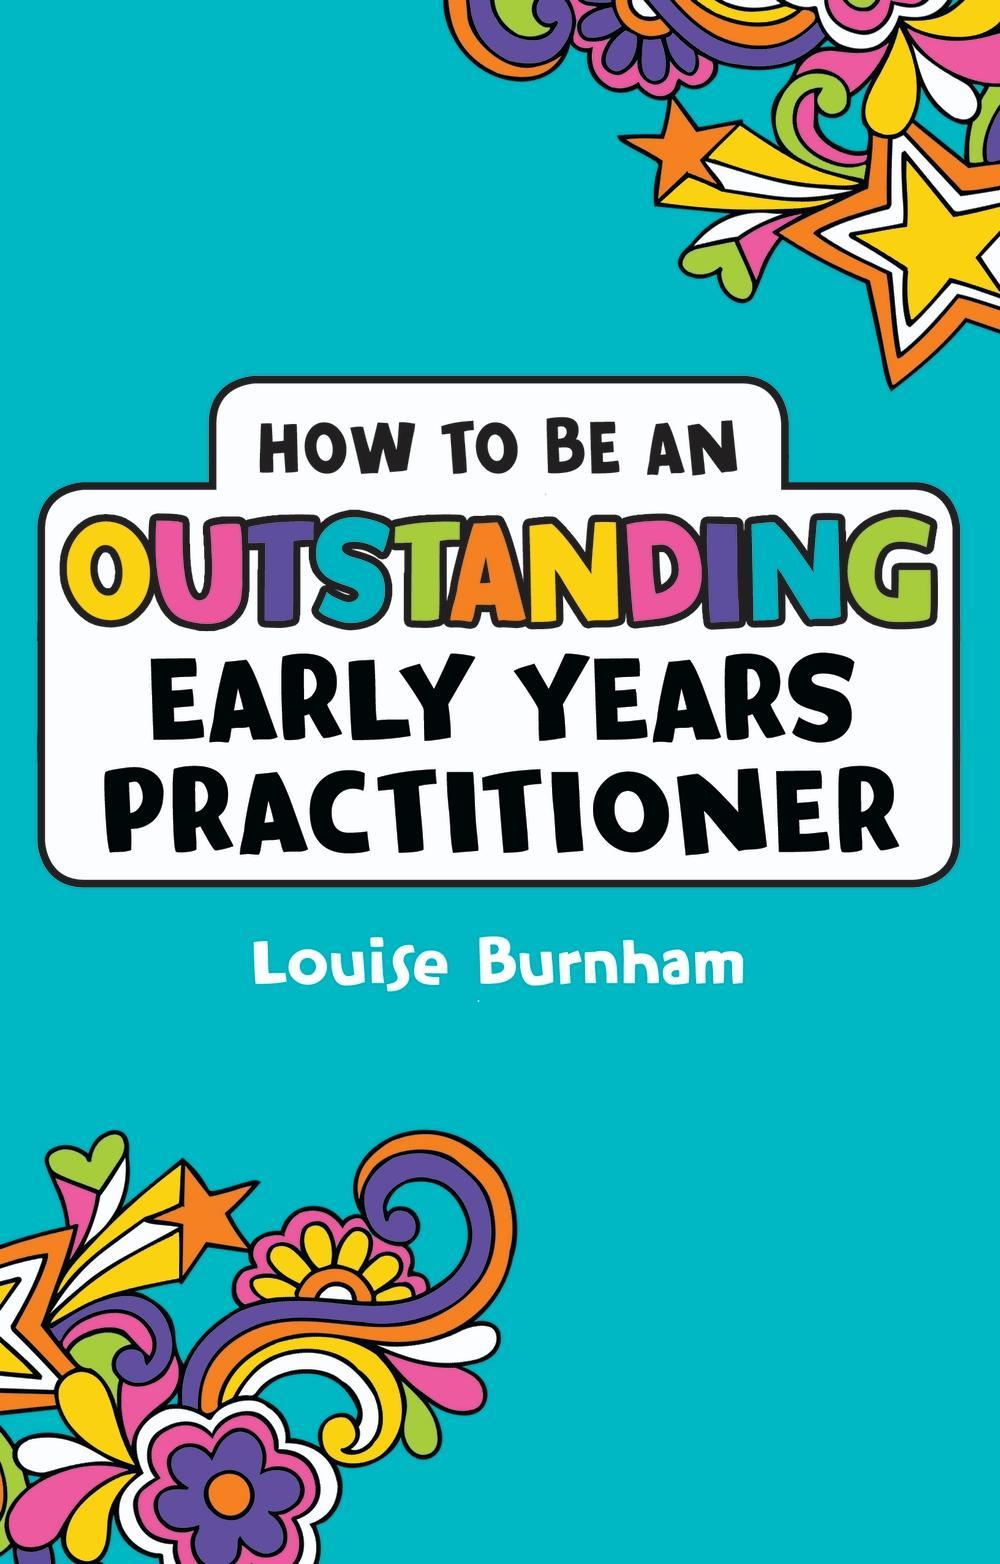 How to be an Outstanding Early Years Practitioner